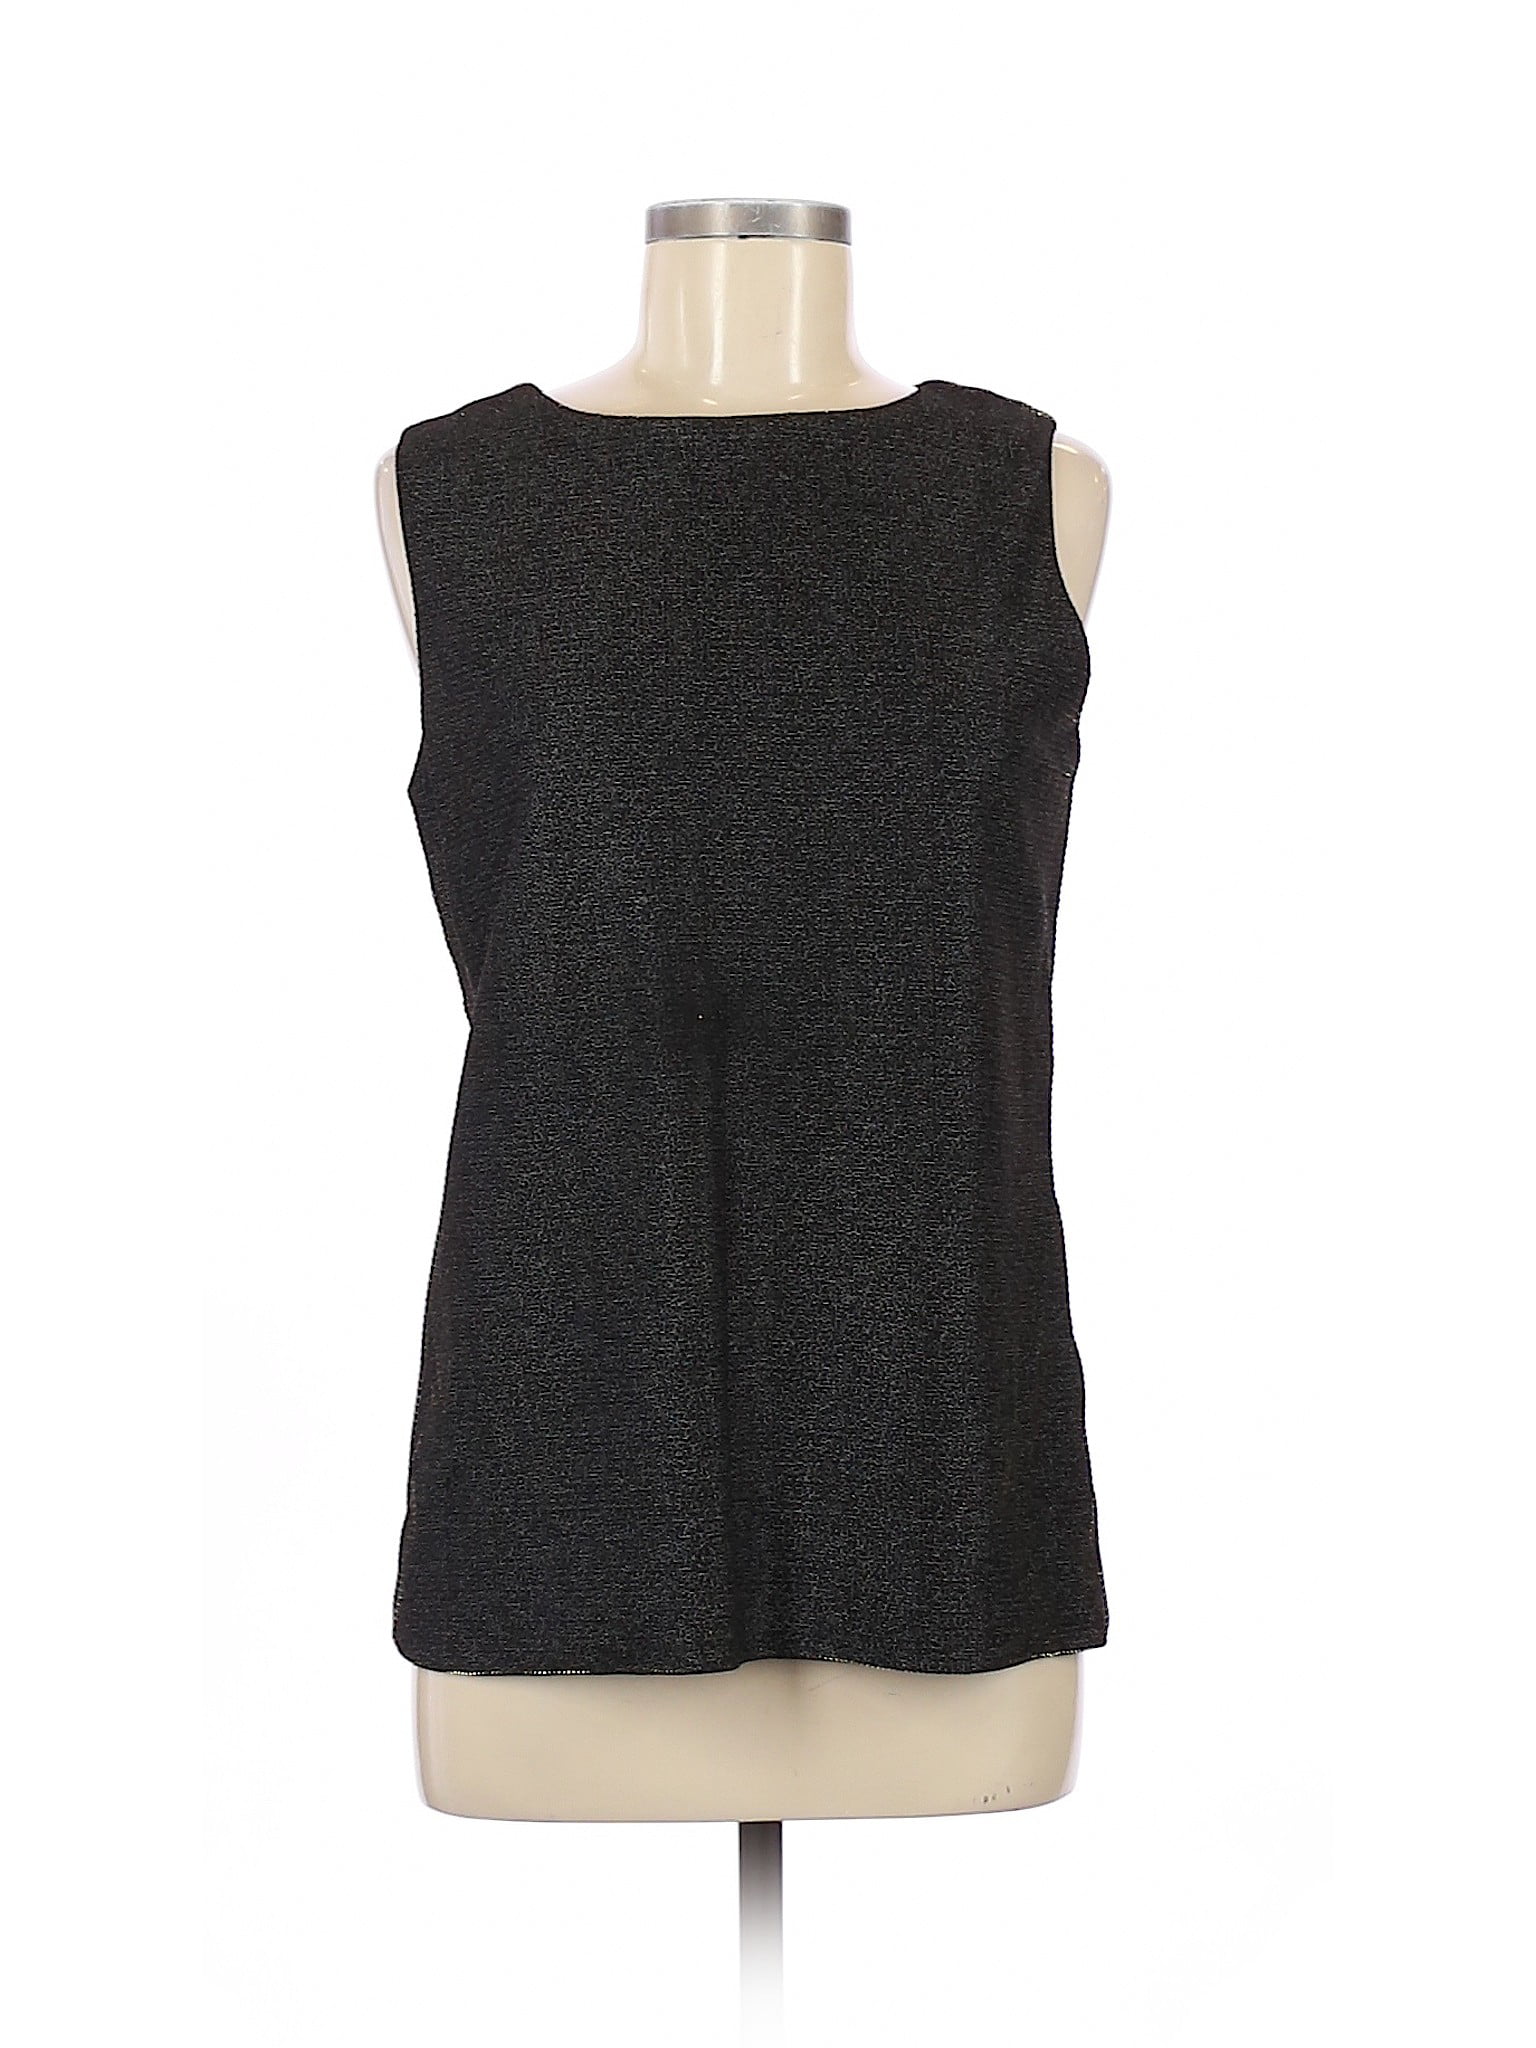 Victoria Pappas - Pre-Owned Victoria Pappas Women's Size 8 Sleeveless ...